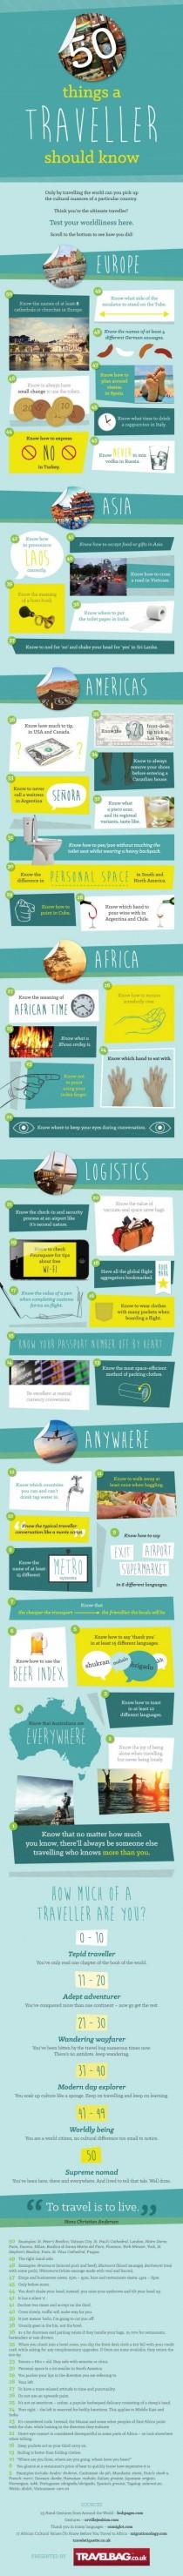 wedding photo - 50 Things A Traveler Should Know Infographic